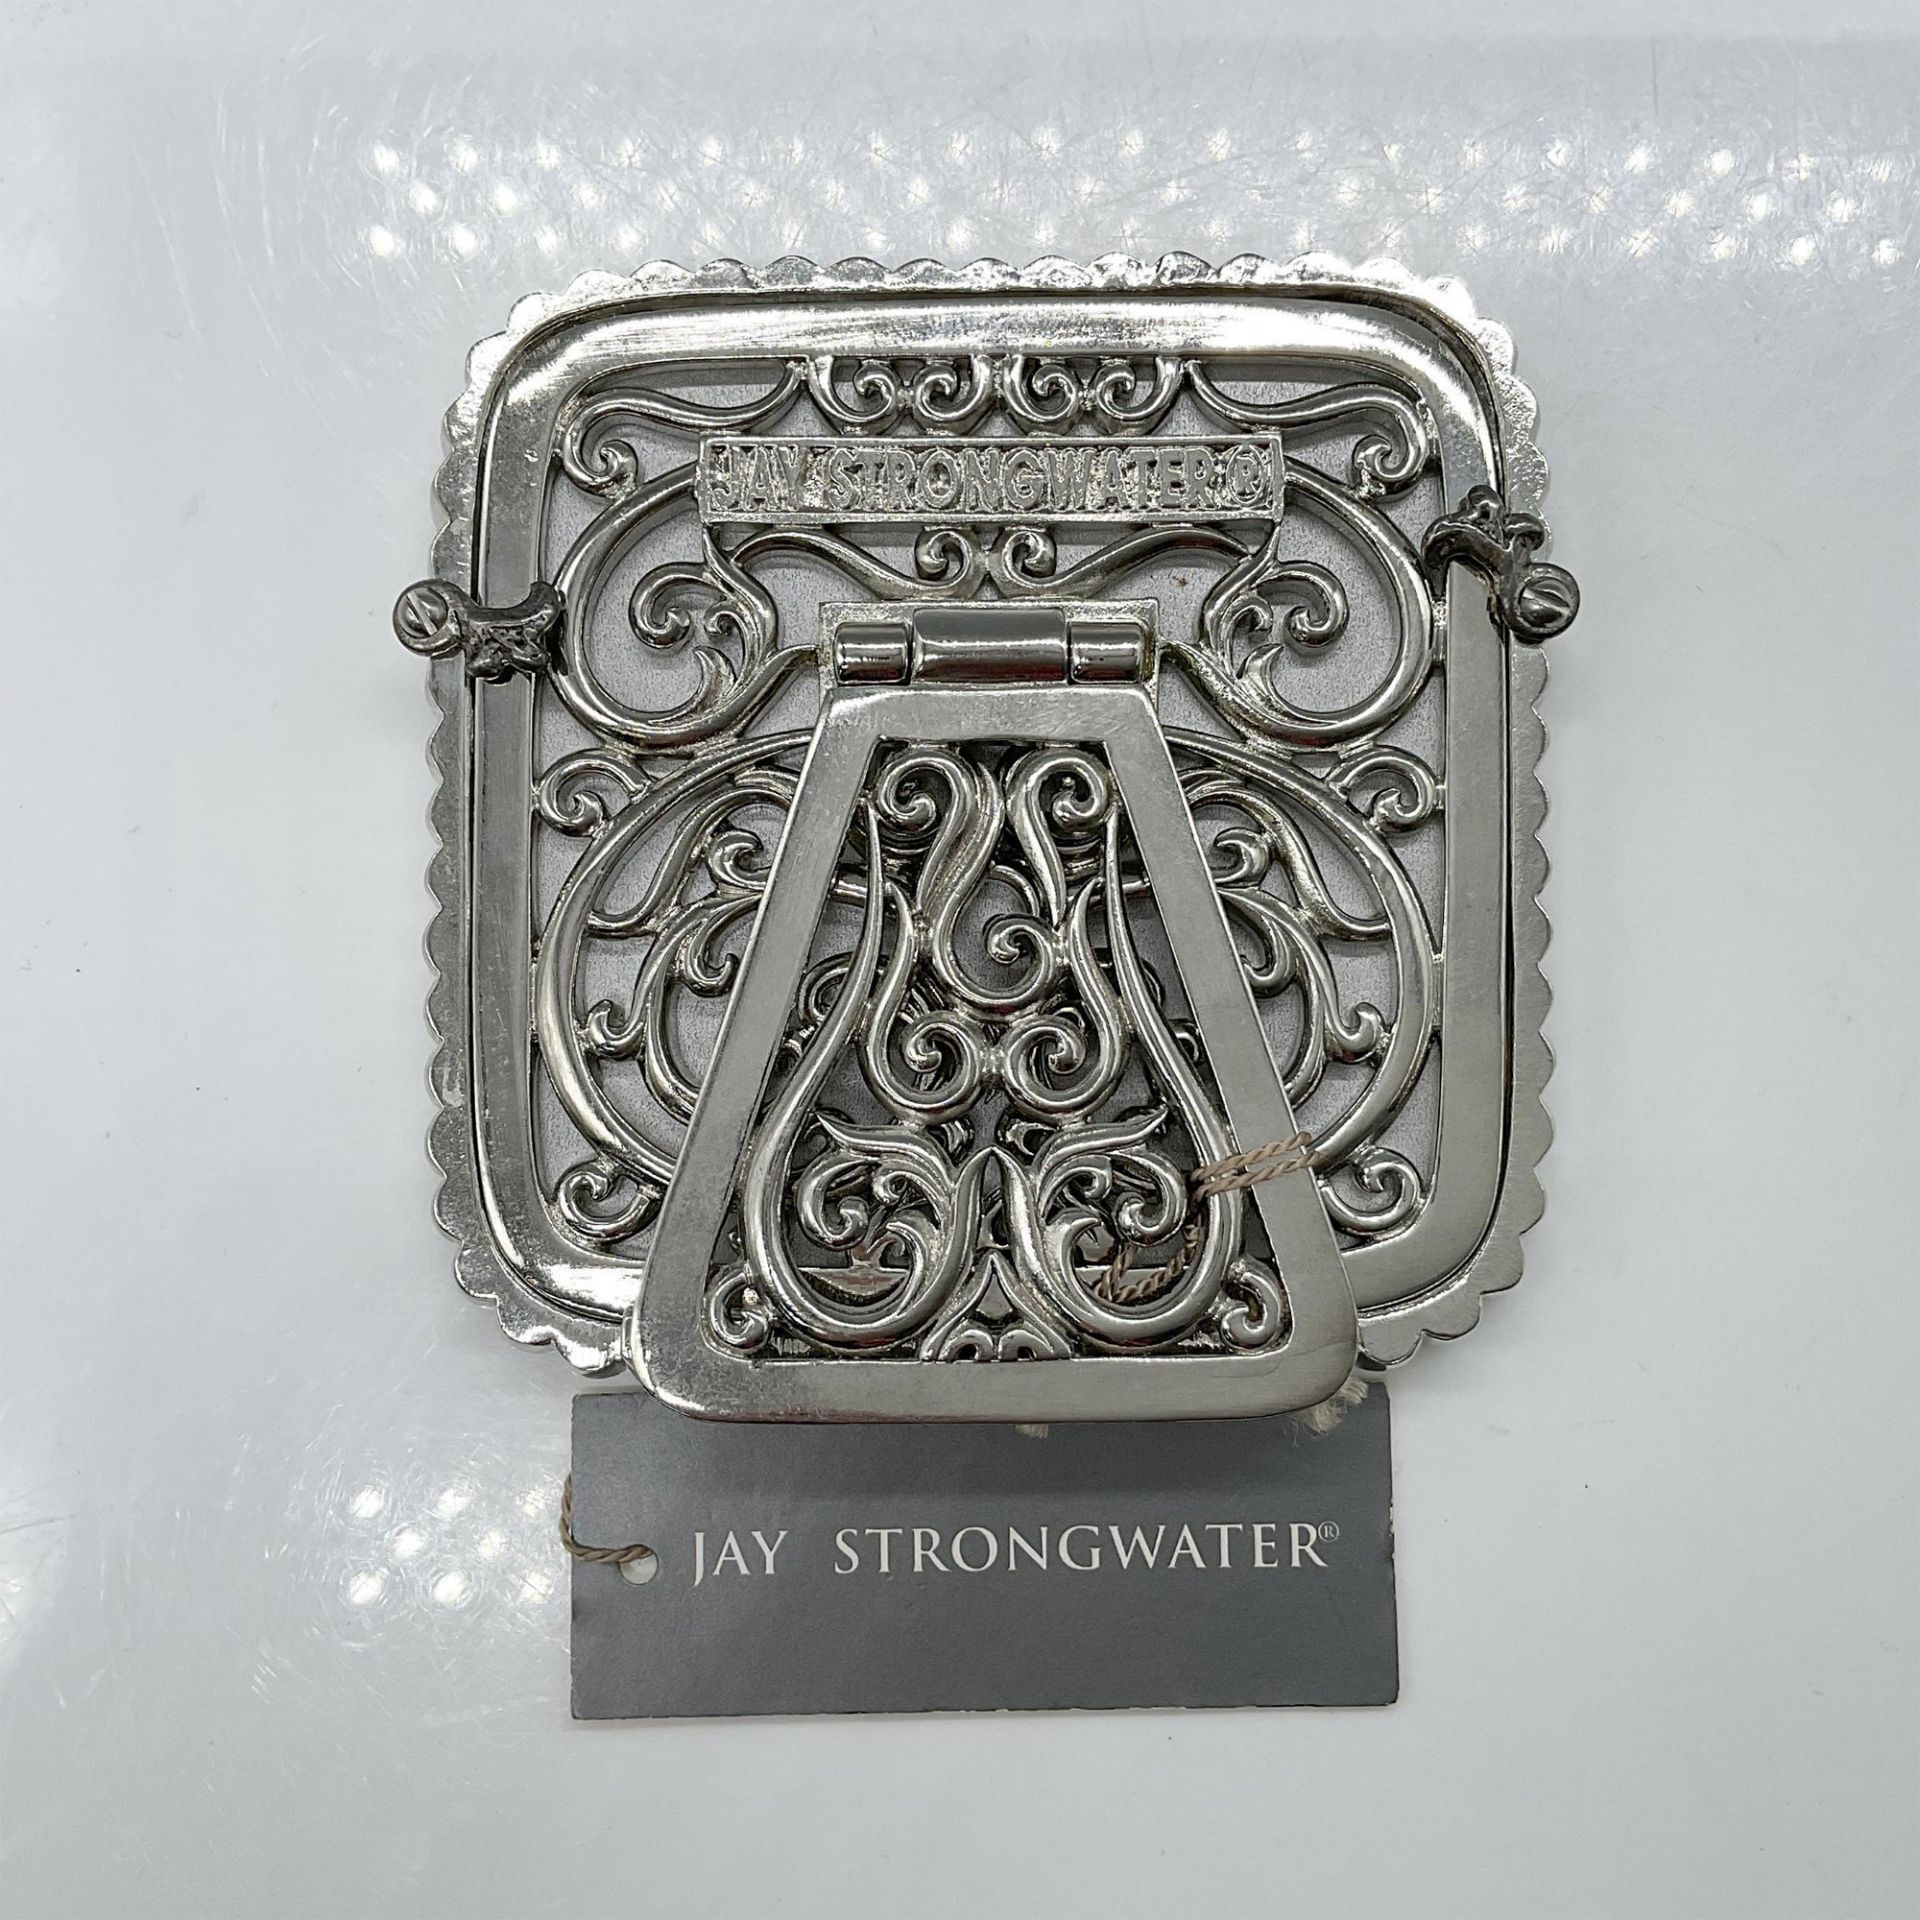 Jay Strongwater Swarovski Picture Frame - Image 2 of 3